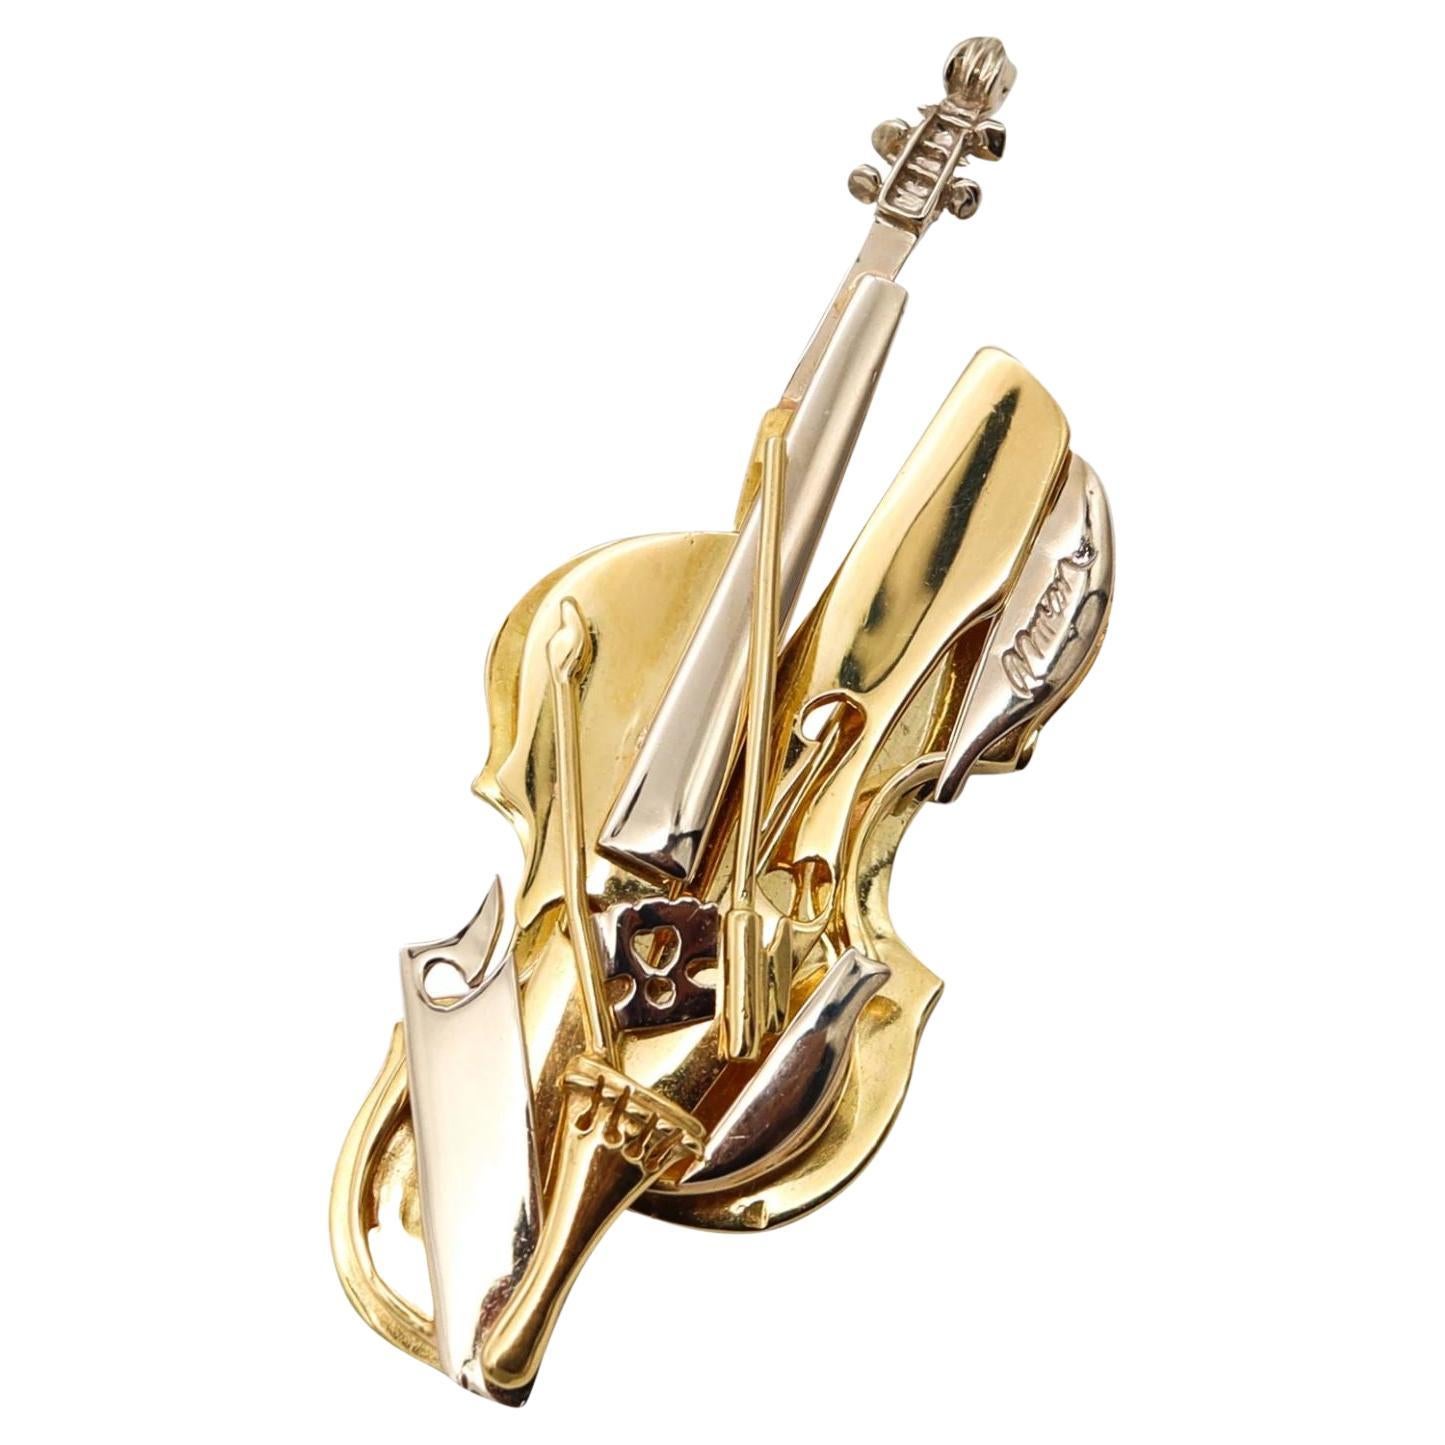 Arman 1970's Rare Sculptural Deconstructed Violin 18Kt Gold French Edition 8/8 For Sale